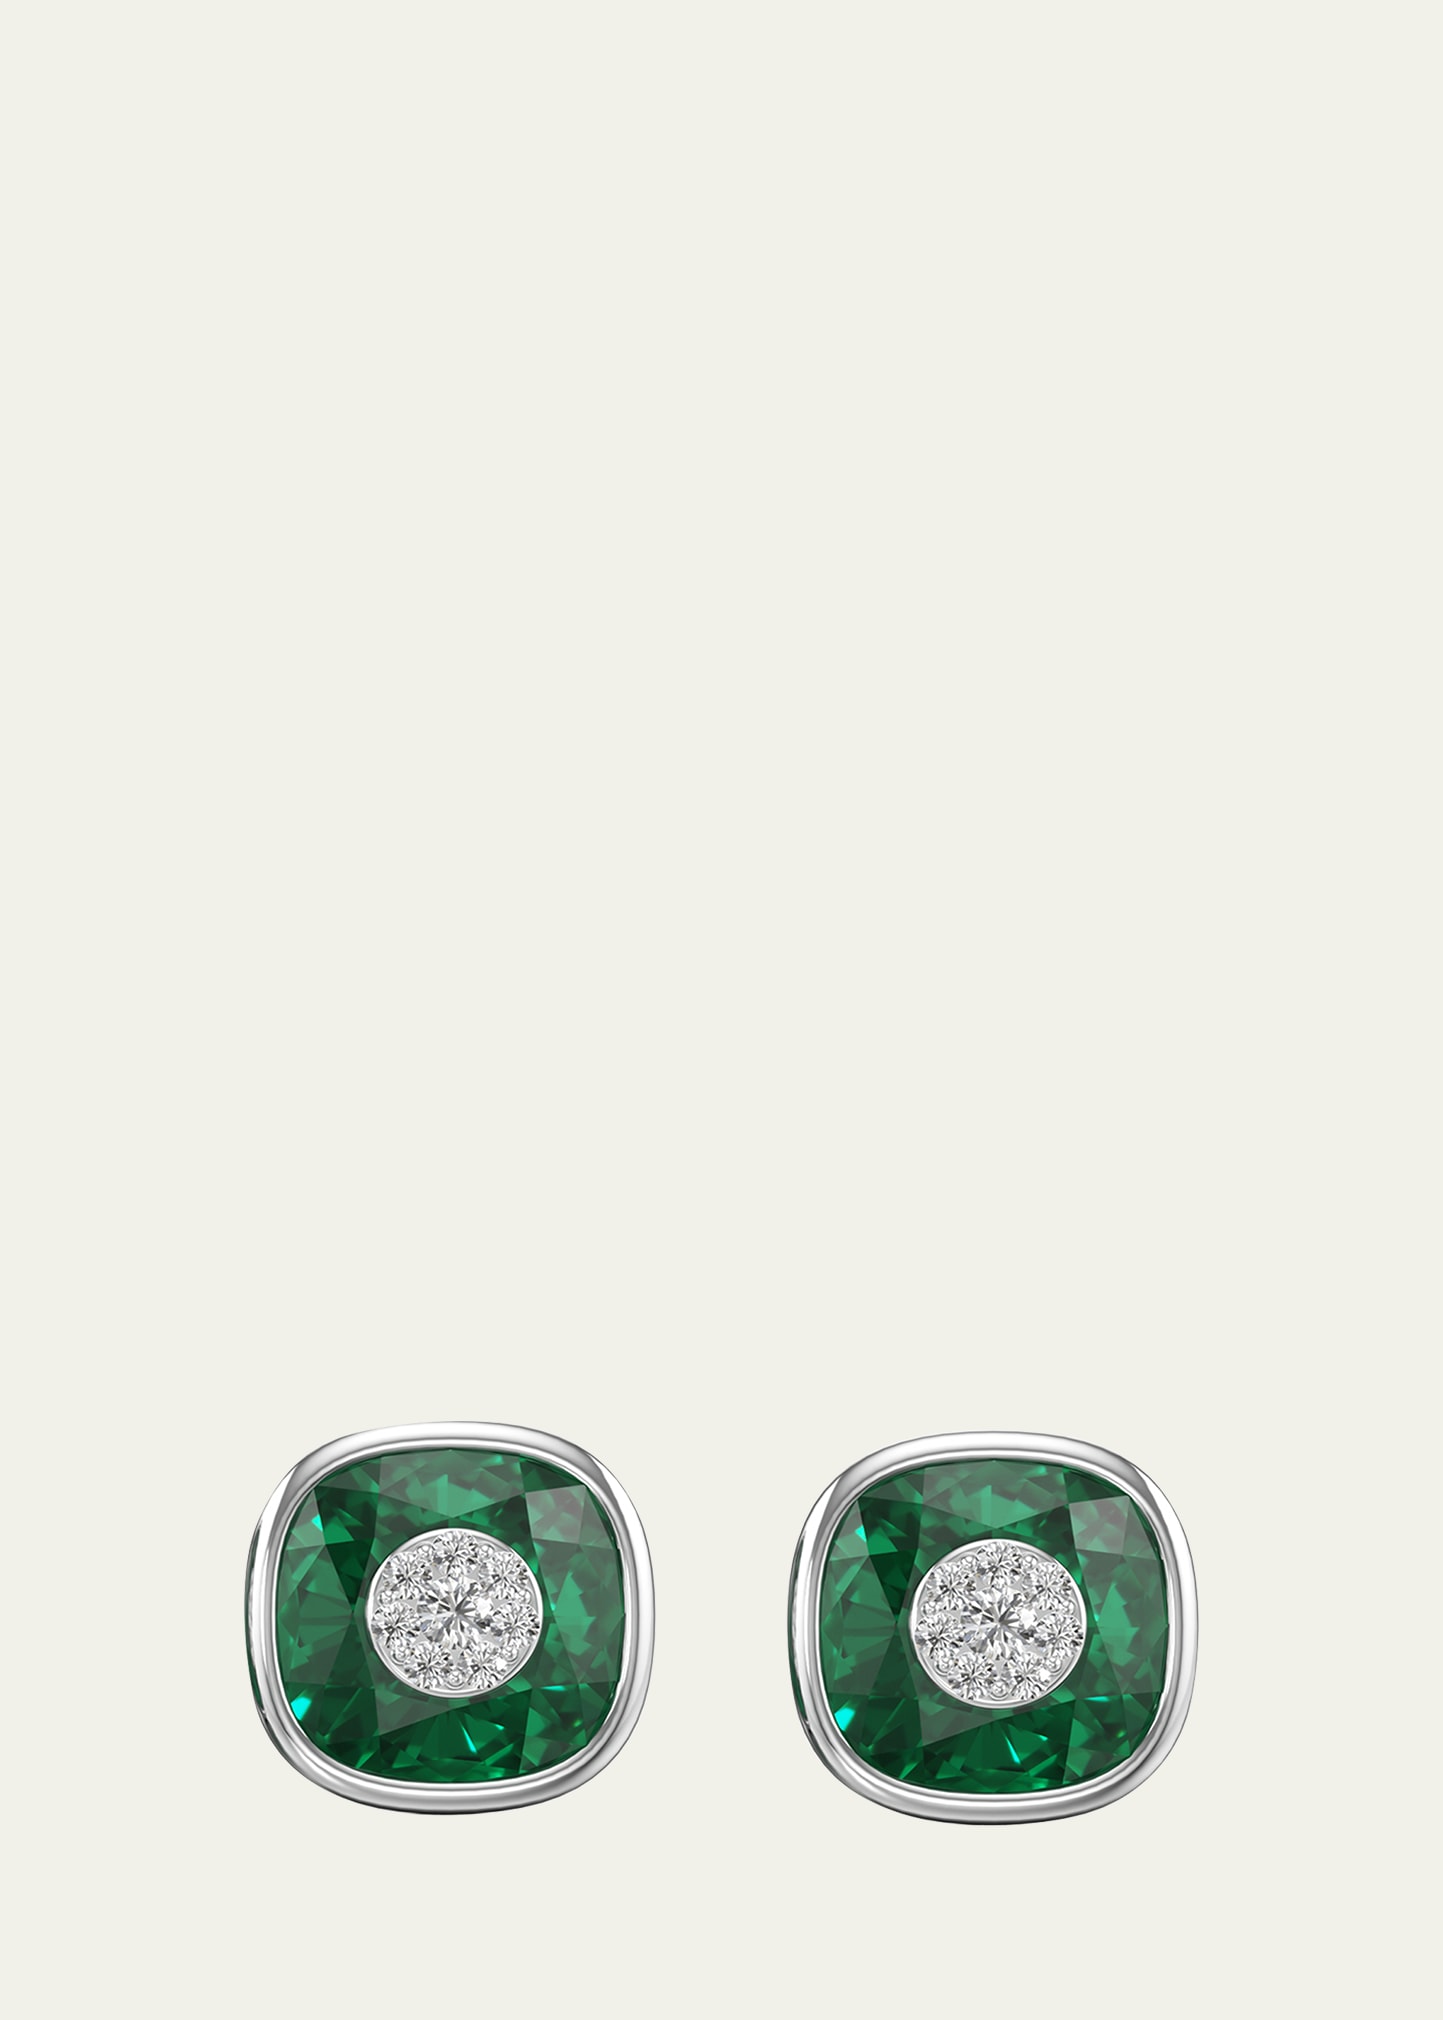 Bhansali One Collection 10mm Cushion Earrings with White Gold Bezel, Emerald